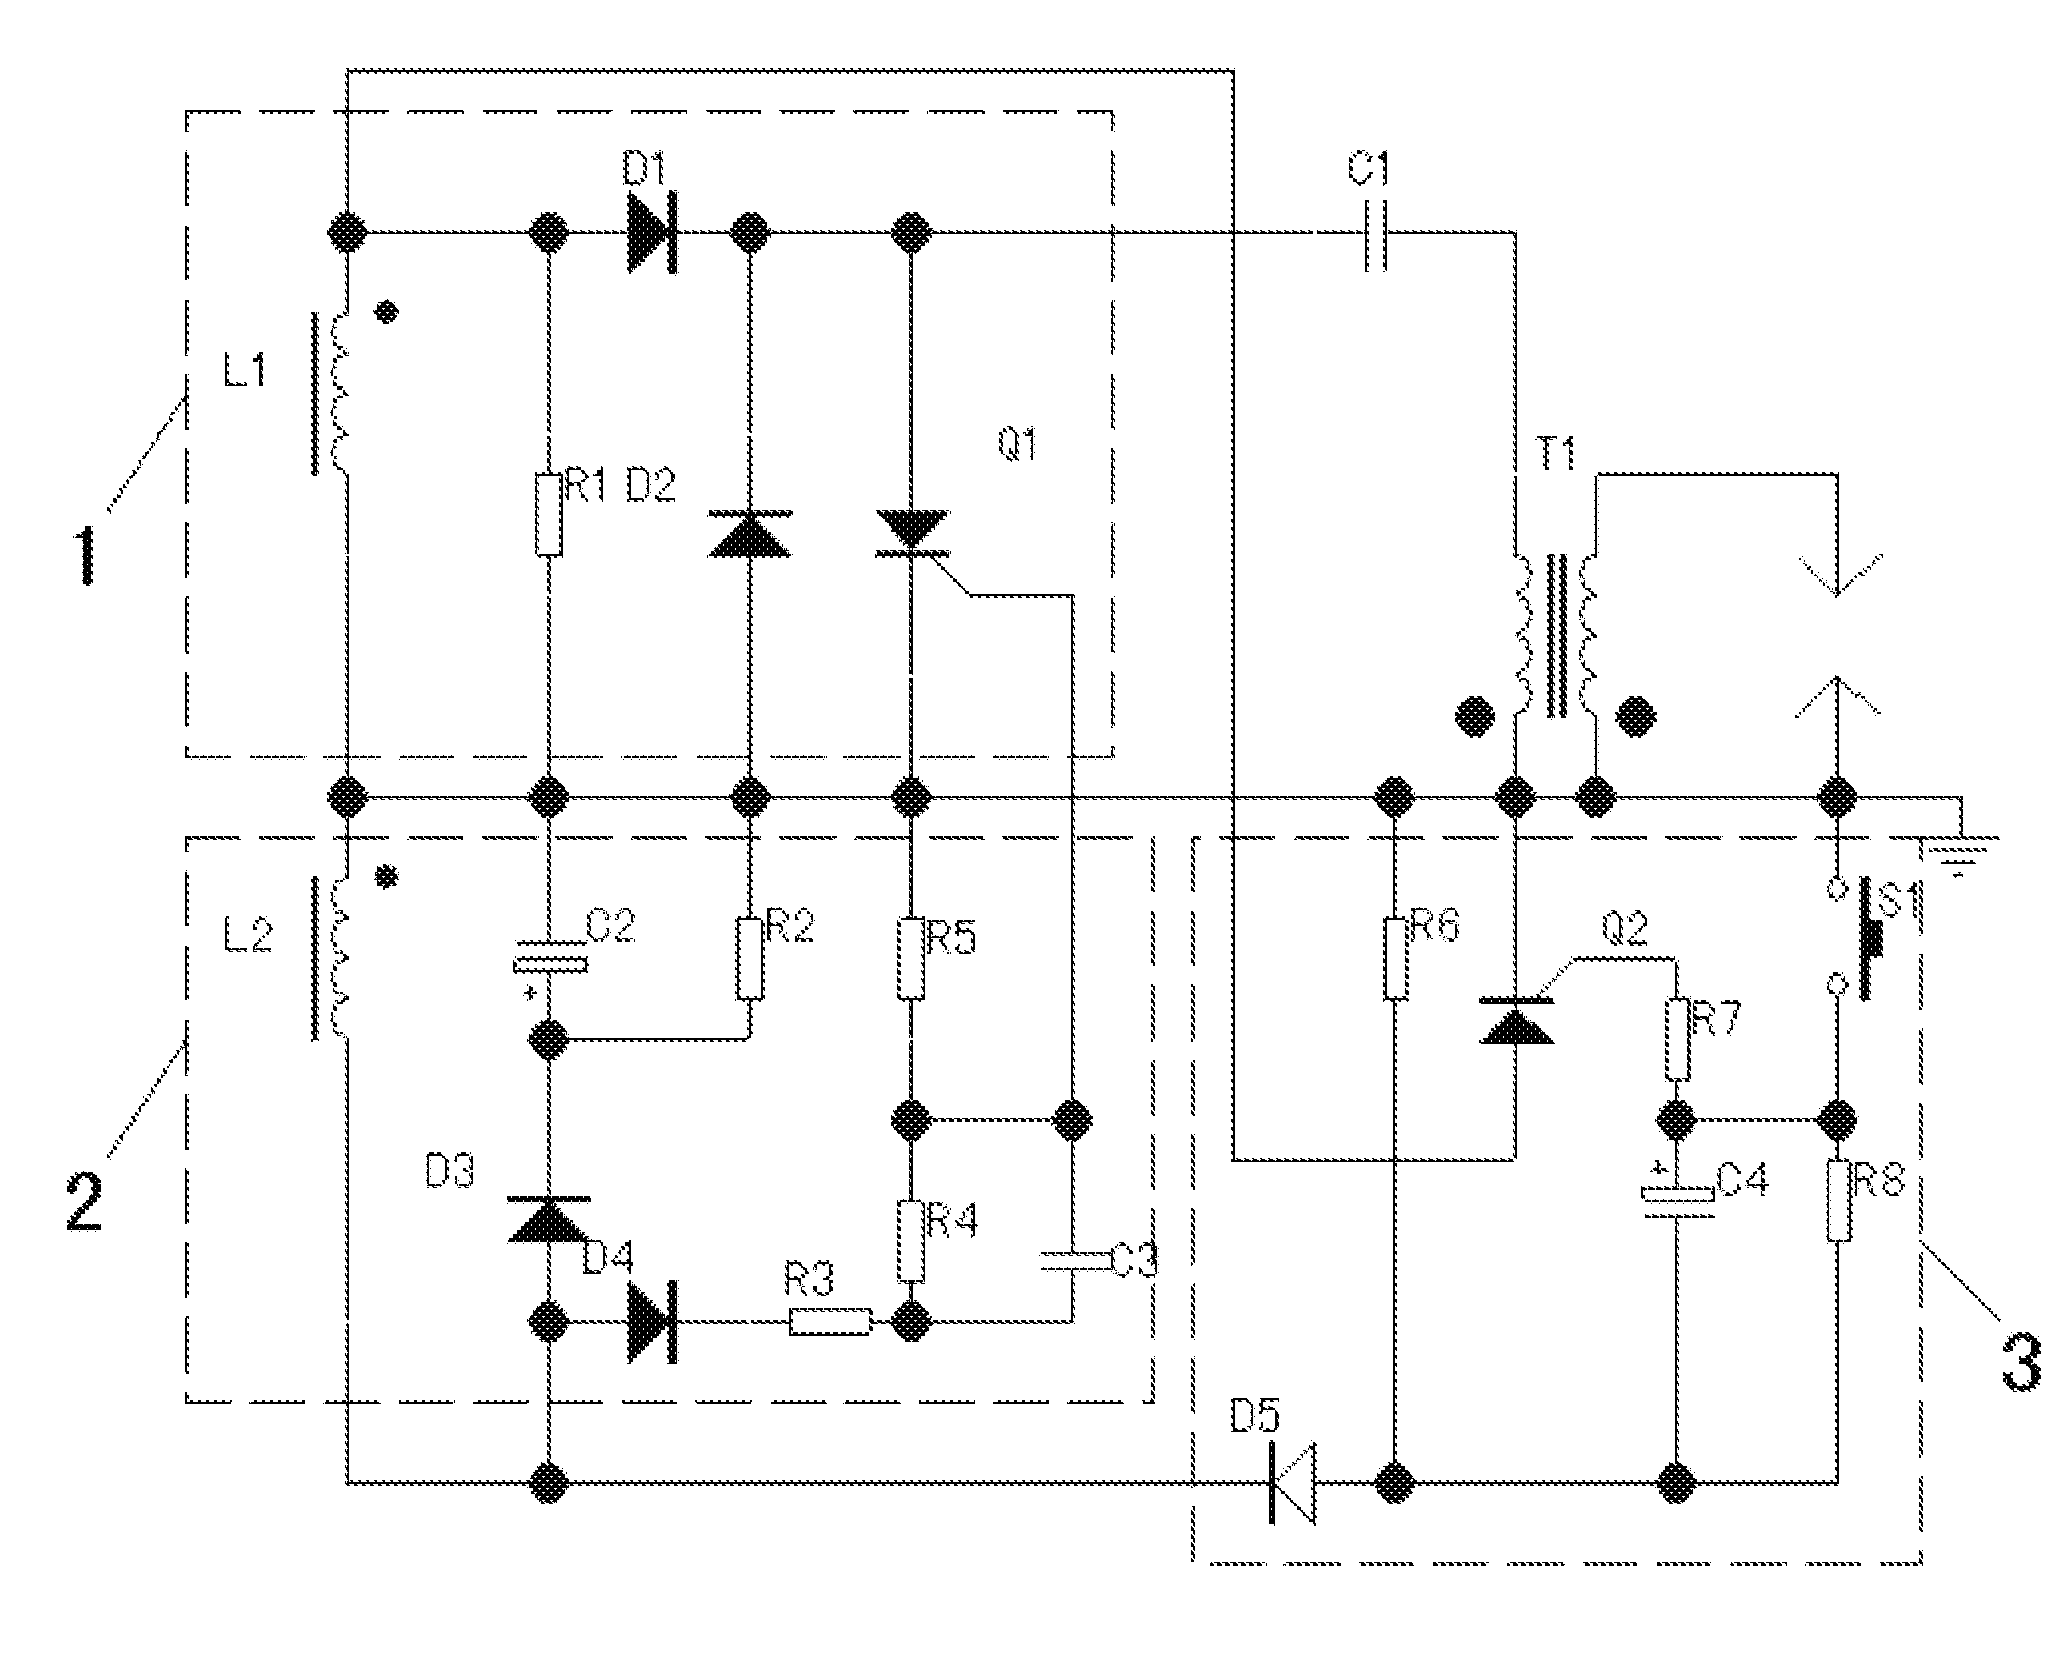 Capacitive igniter with a flameout time-delay function